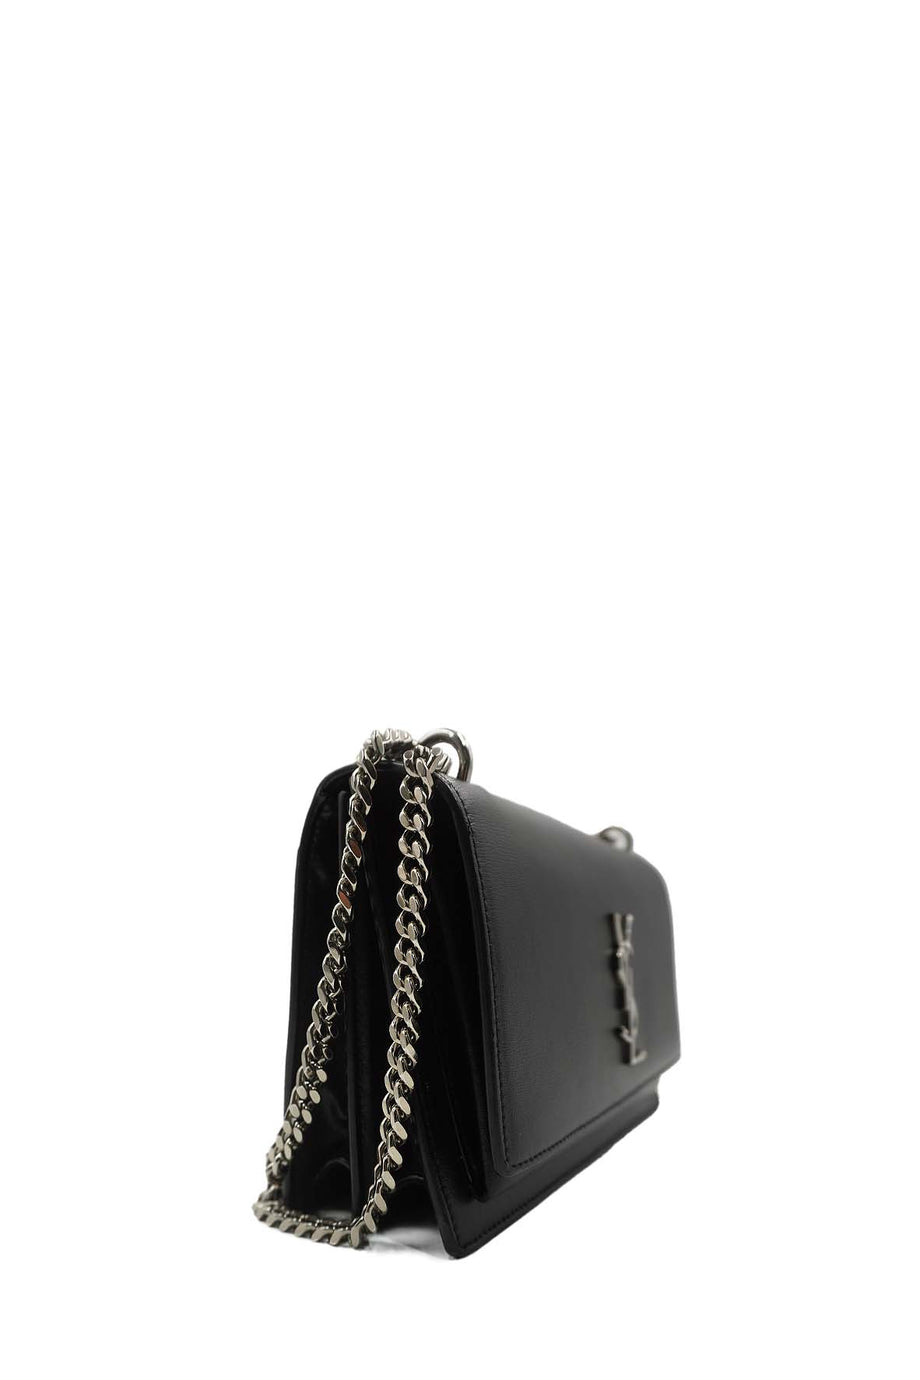 New Saint Laurent Small Lou Lou bag in Black with Silver Hardware – Love A  Preloved